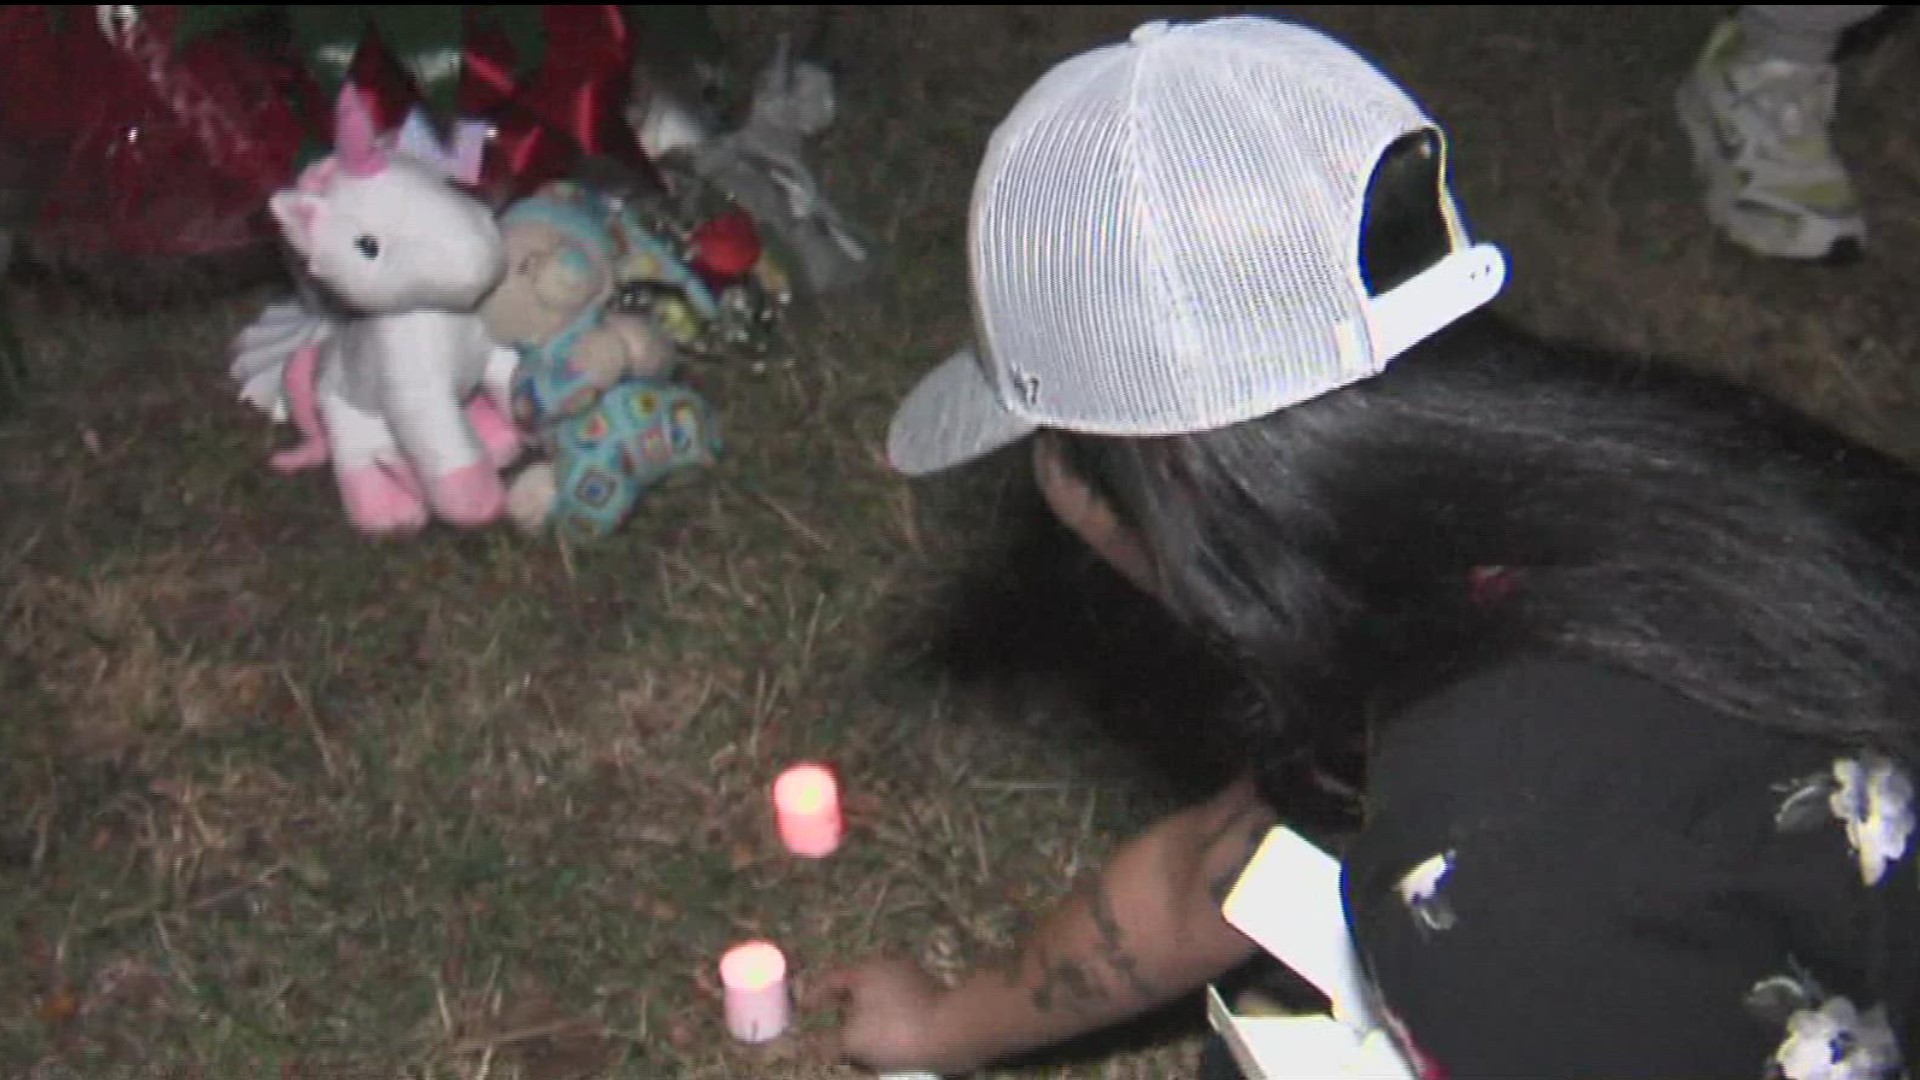 The family held a vigil for the 11-year-old girl -- making sure it was open to all who cared to stop by to pay their respects.